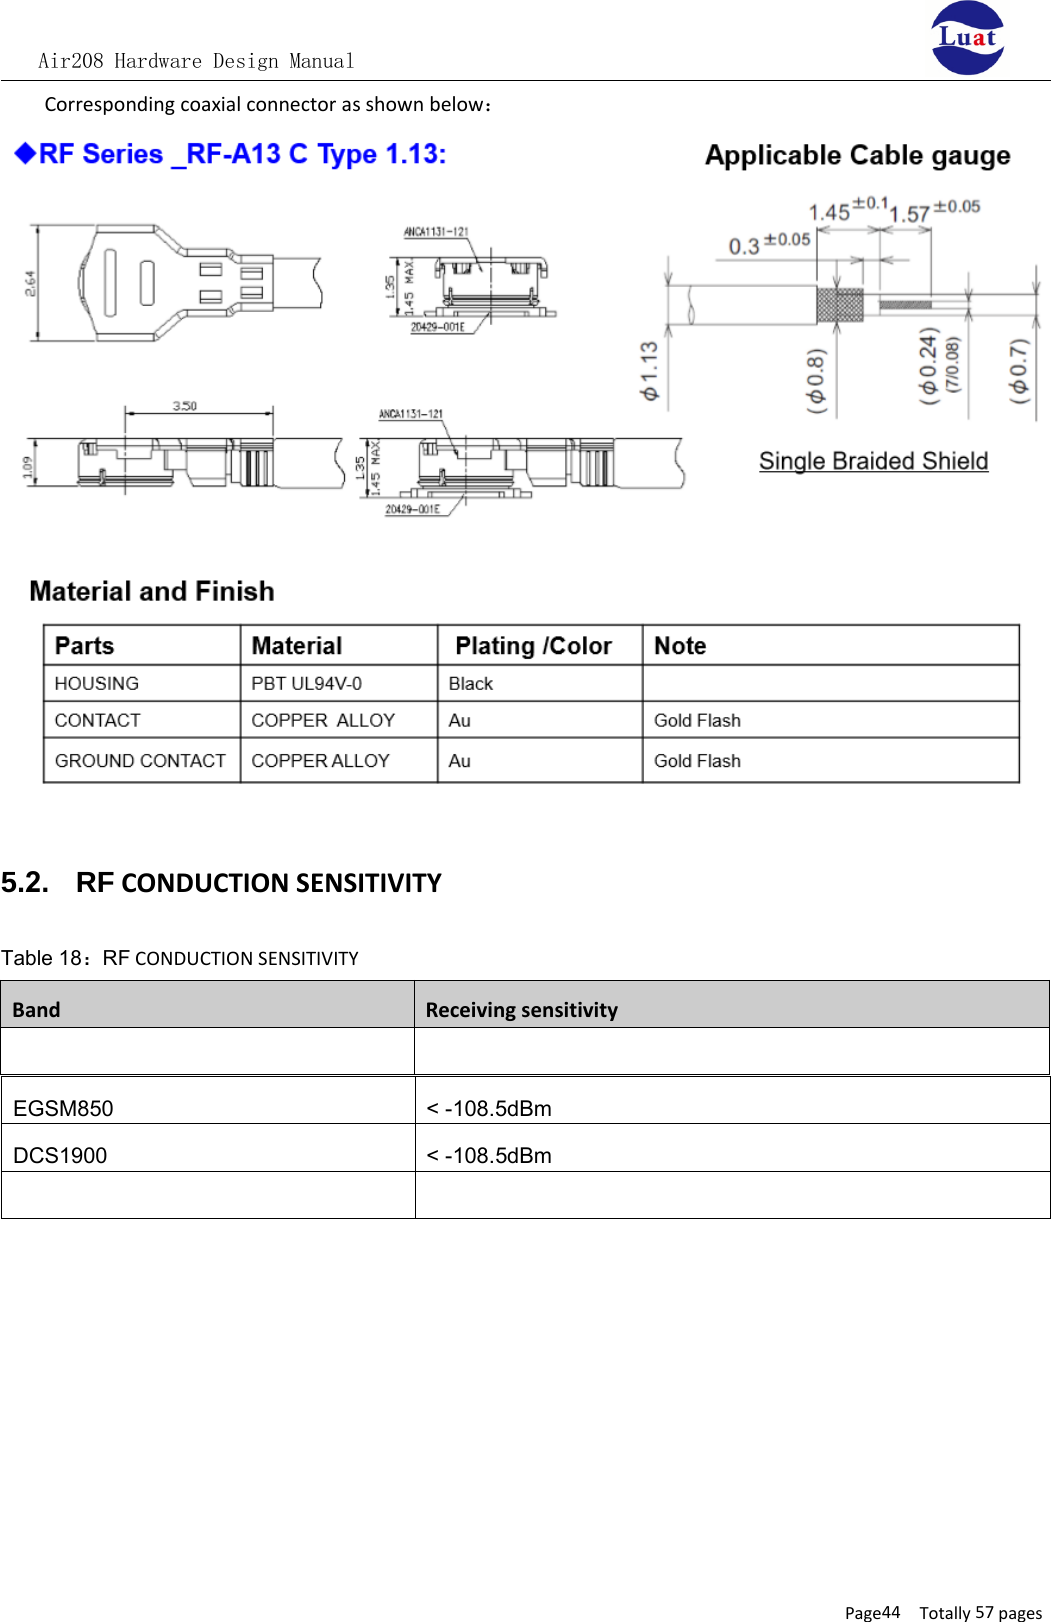 Air208 Hardware Design ManualPage44 Totally 57 pagesCorresponding coaxial connector as shown below：5.2. RF CONDUCTION SENSITIVITYTable 18：RF CONDUCTION SENSITIVITYBand Receiving sensitivityEGSM850DCS1900&lt; -108.5dBm&lt; -108.5dBm